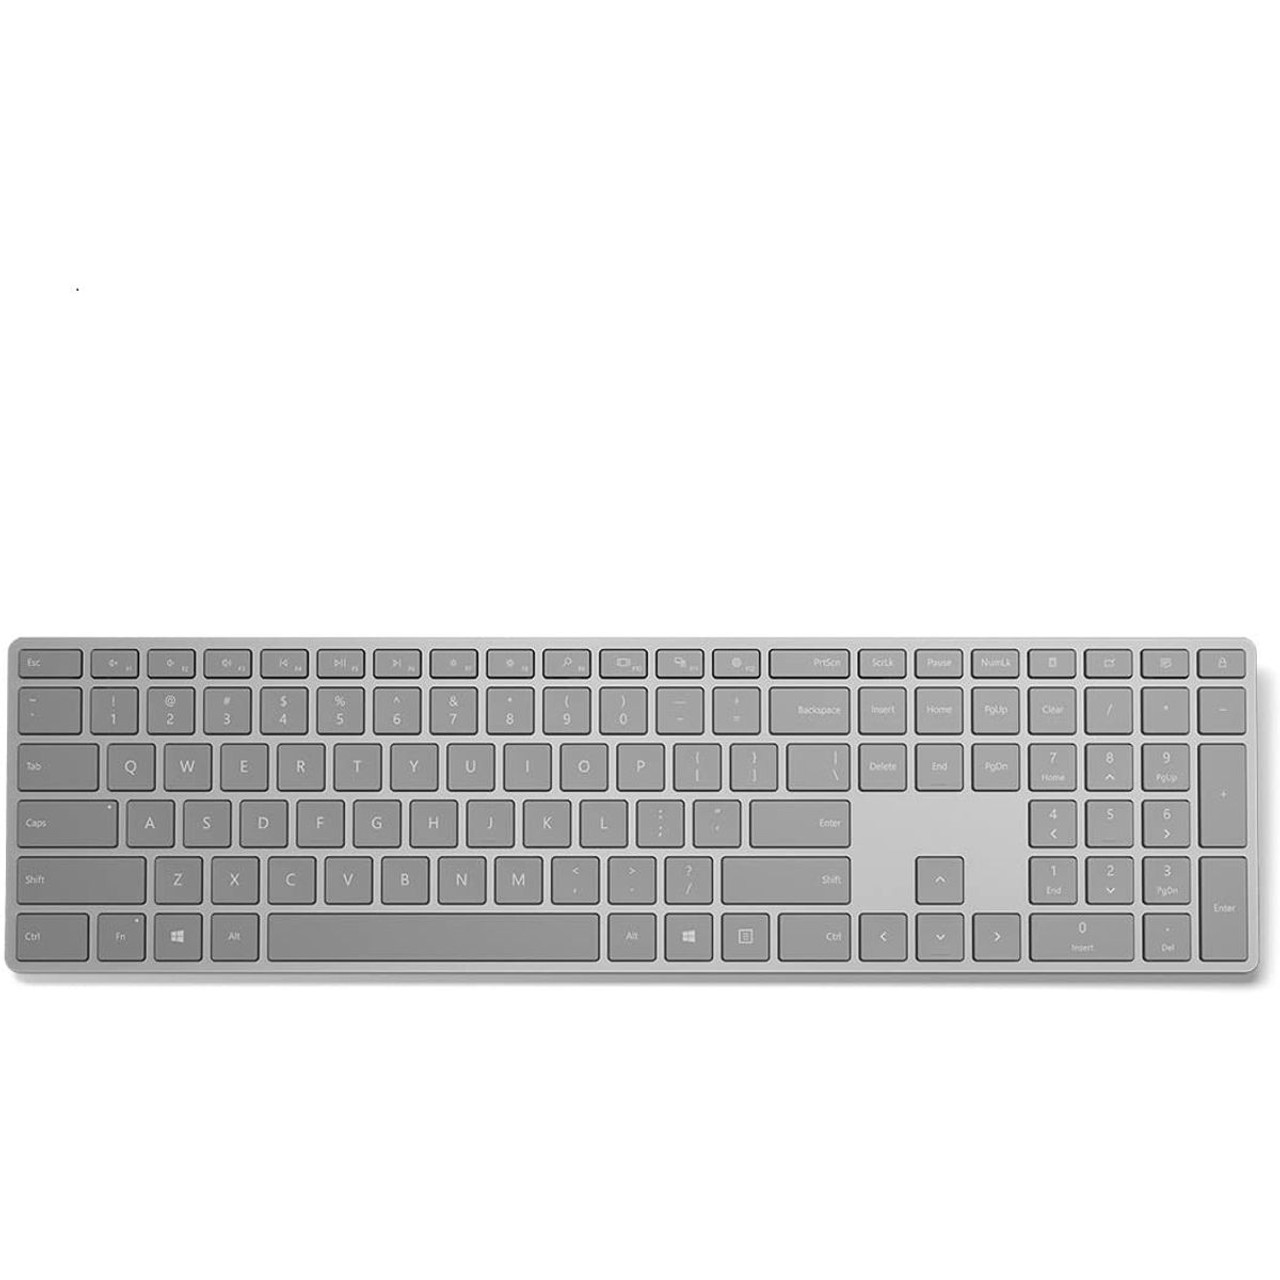 Microsoft® Surface Wireless Keyboard, French/Canadian, WS2-000023 product image